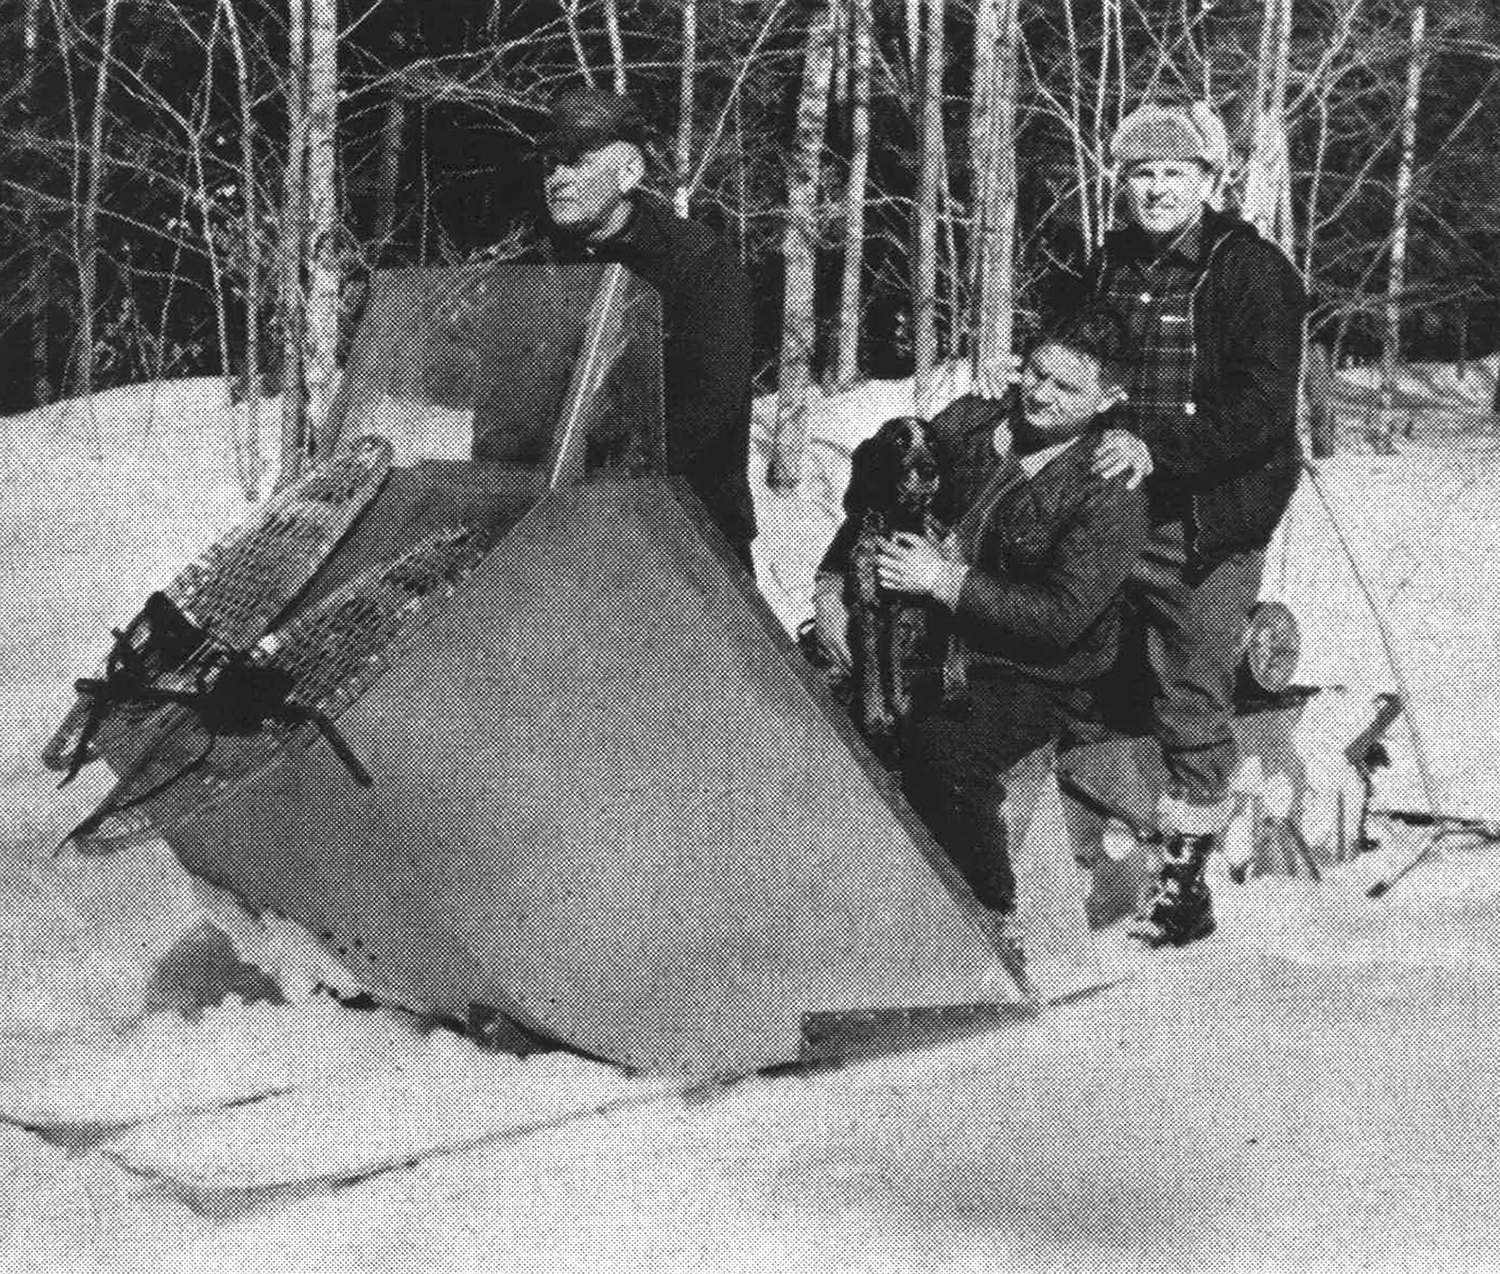 three hunters and one dog on a snow sled